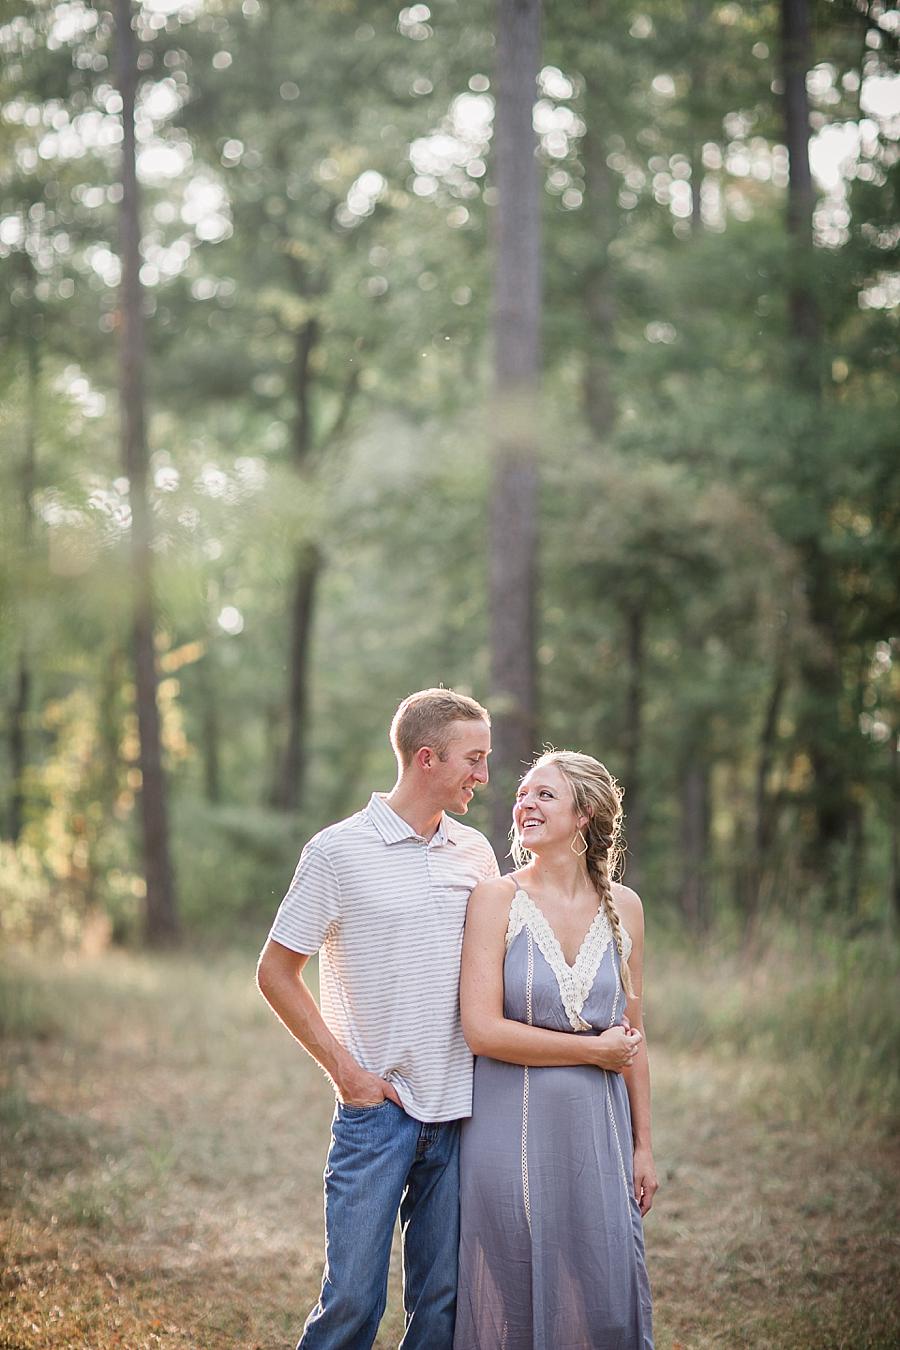 French braid at this Air Force Engagement Session by Knoxville Wedding Photographer, Amanda May Photos.